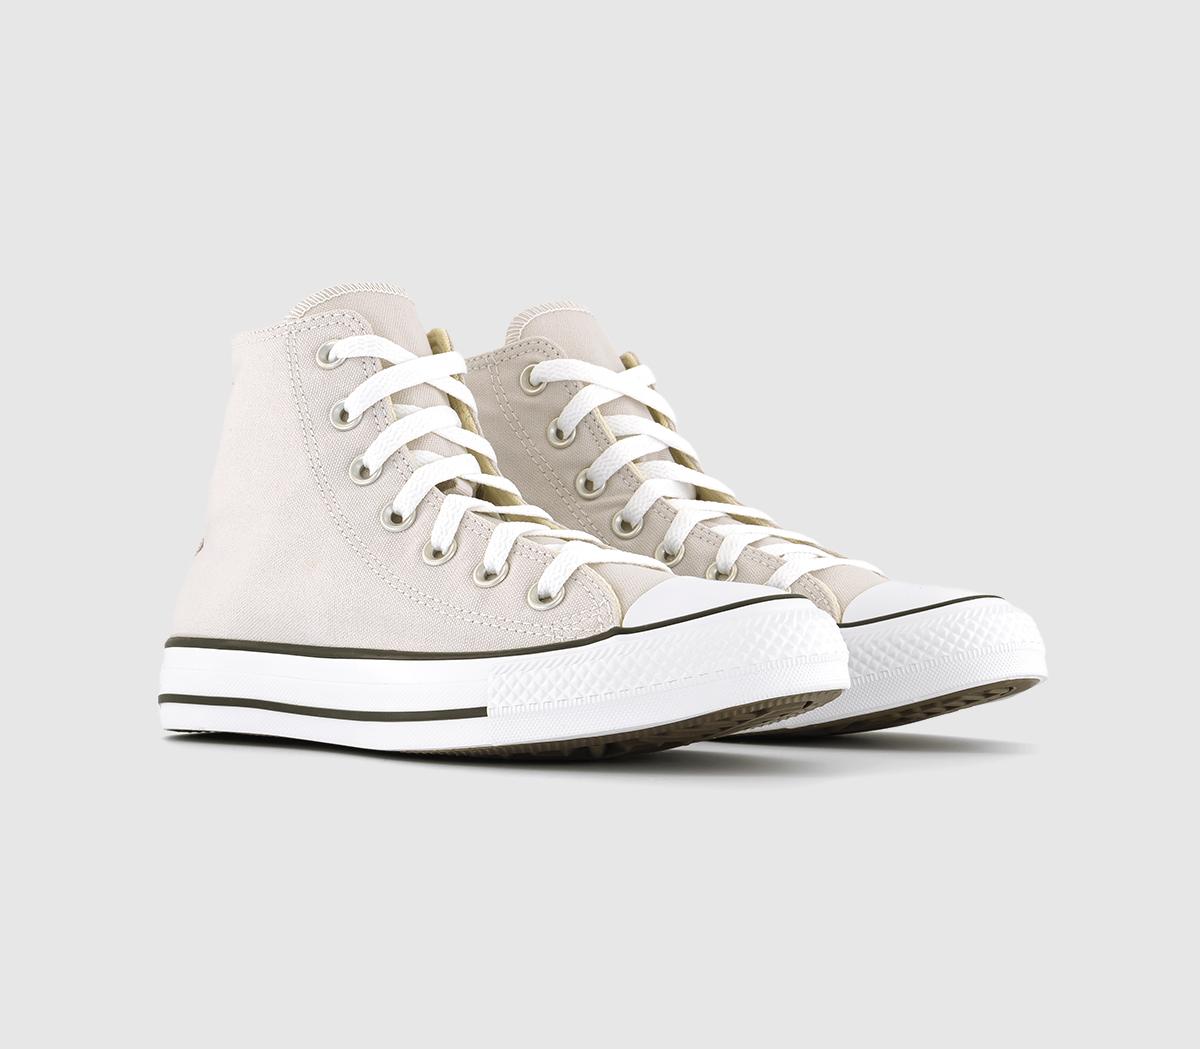 Converse All Star Hi Trainers Pale Putty White Black Natural, 3.5